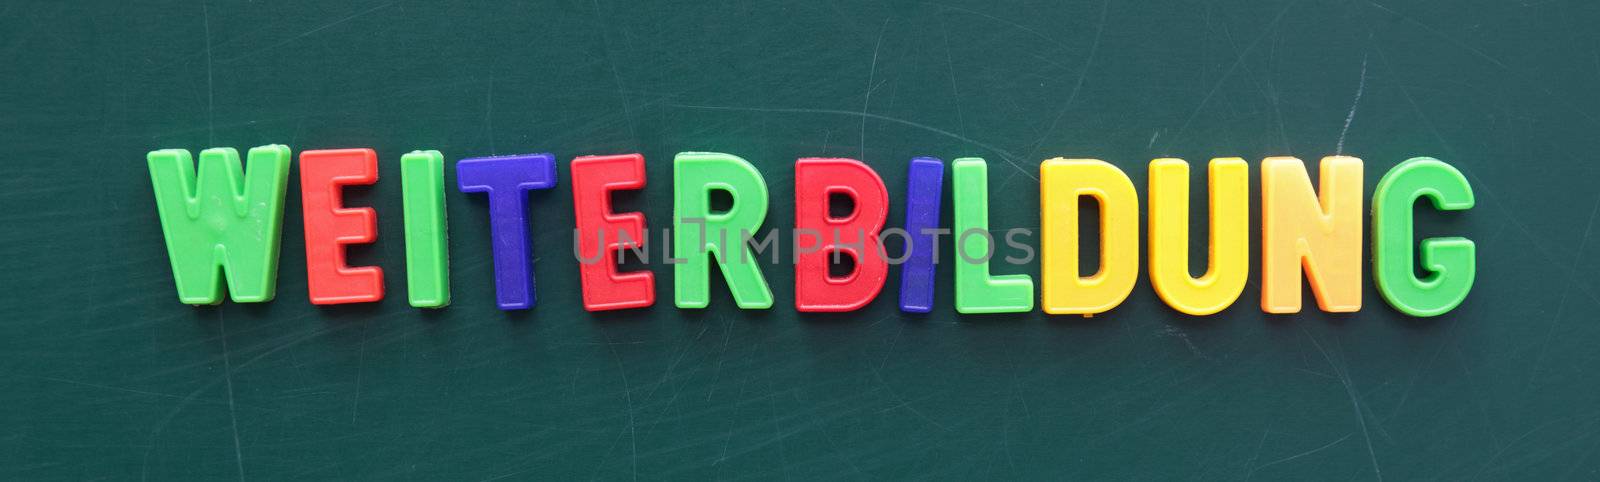 The german term for schooling in colorful letters on a blackboard.